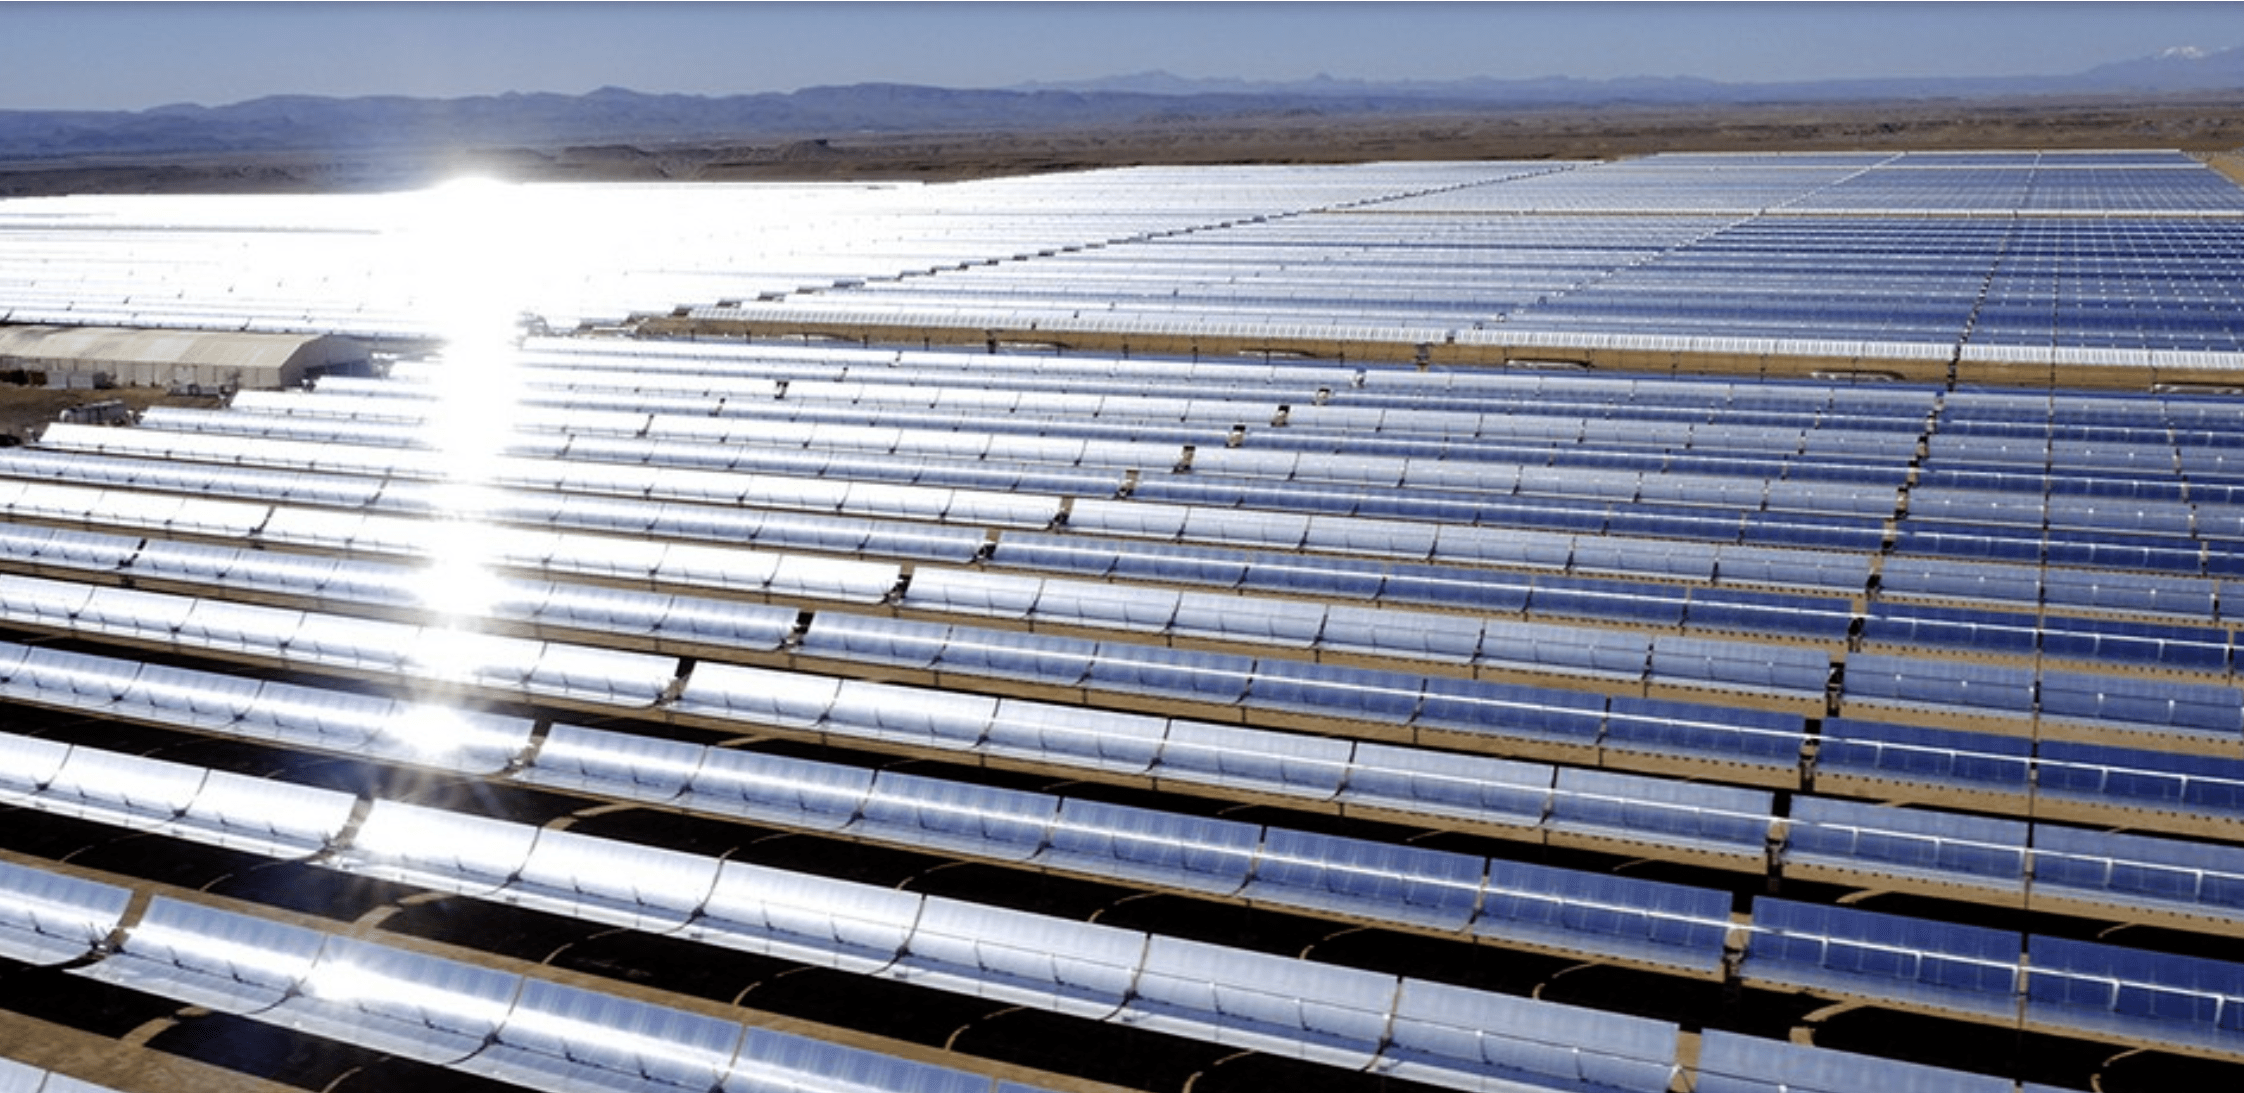 Abengoa wins Solar Project of the Year award for 600 MW trough CSP at NOOR